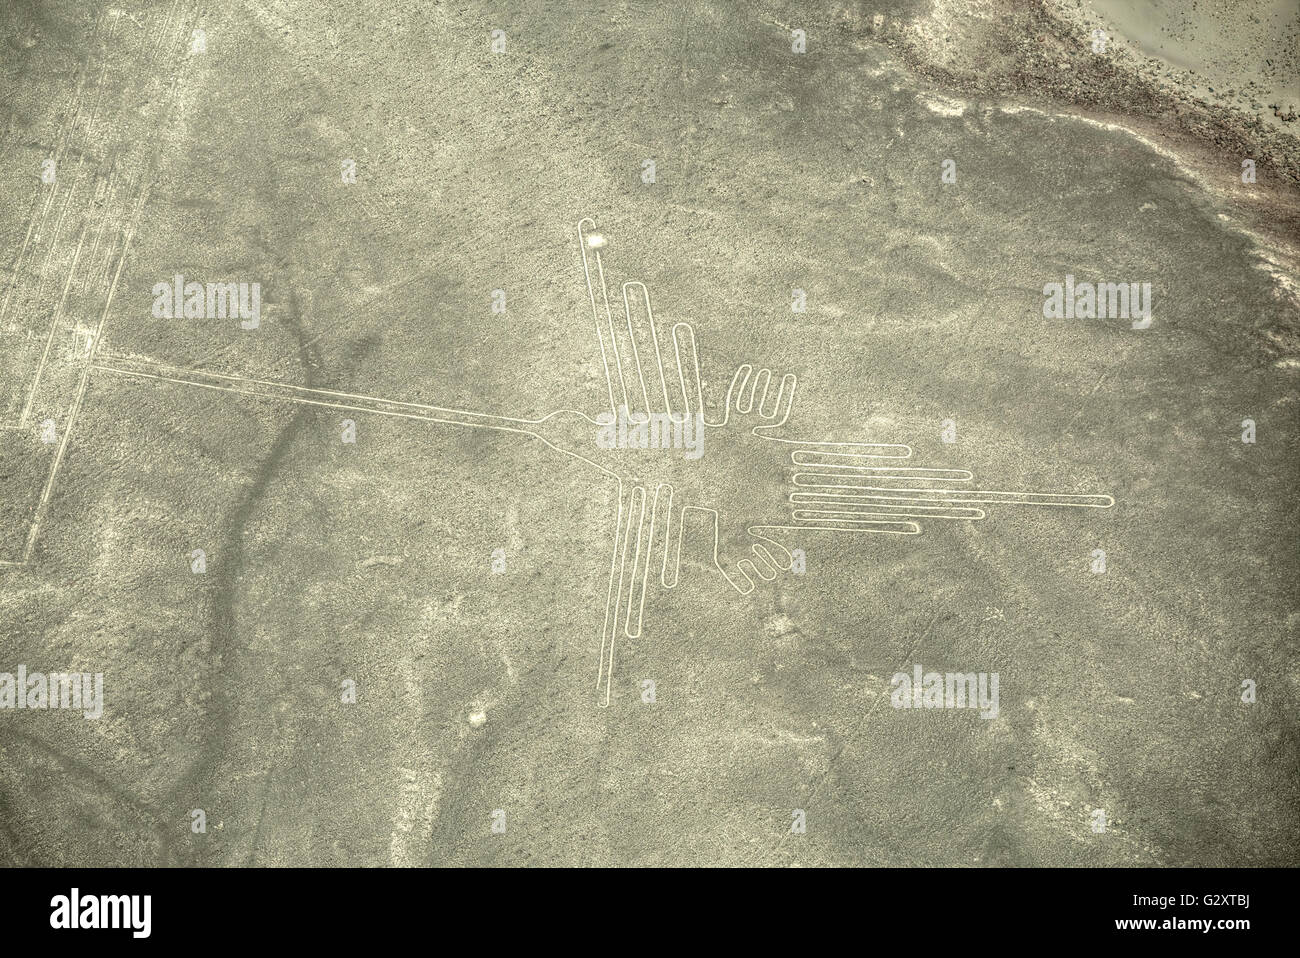 Aerial view of geoglyphs near Nazca - famous Nazca Lines, Peru. In the center, Hummingbird figure is present Stock Photo